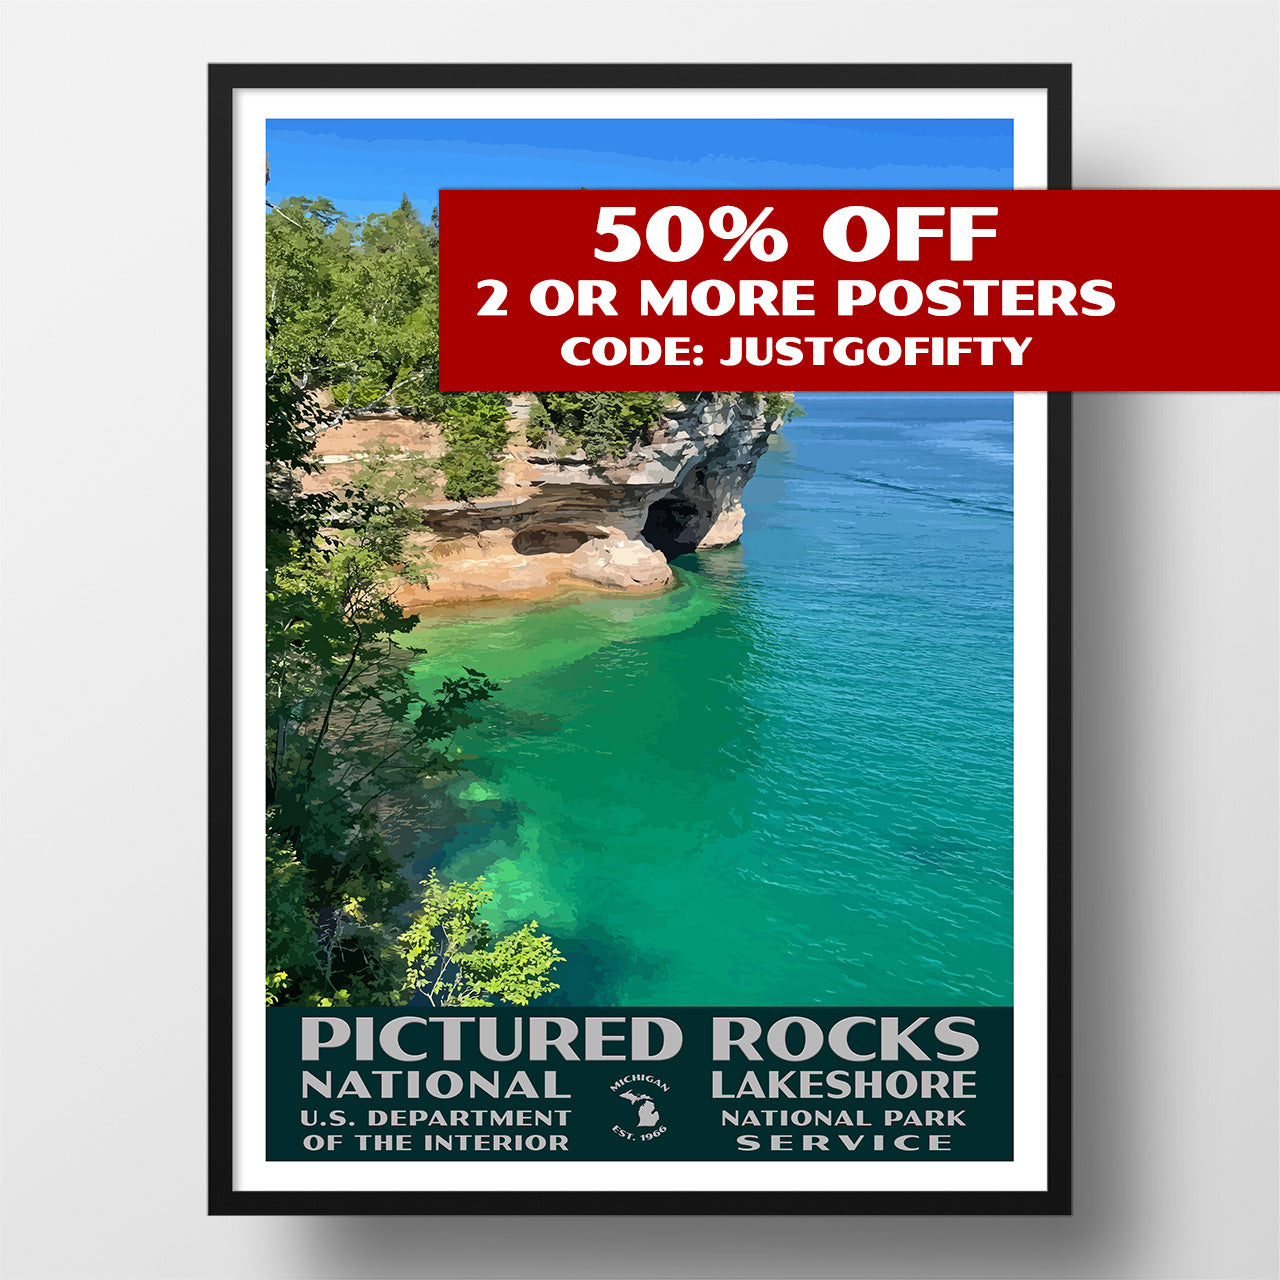 pictured rocks national lakeshore poster